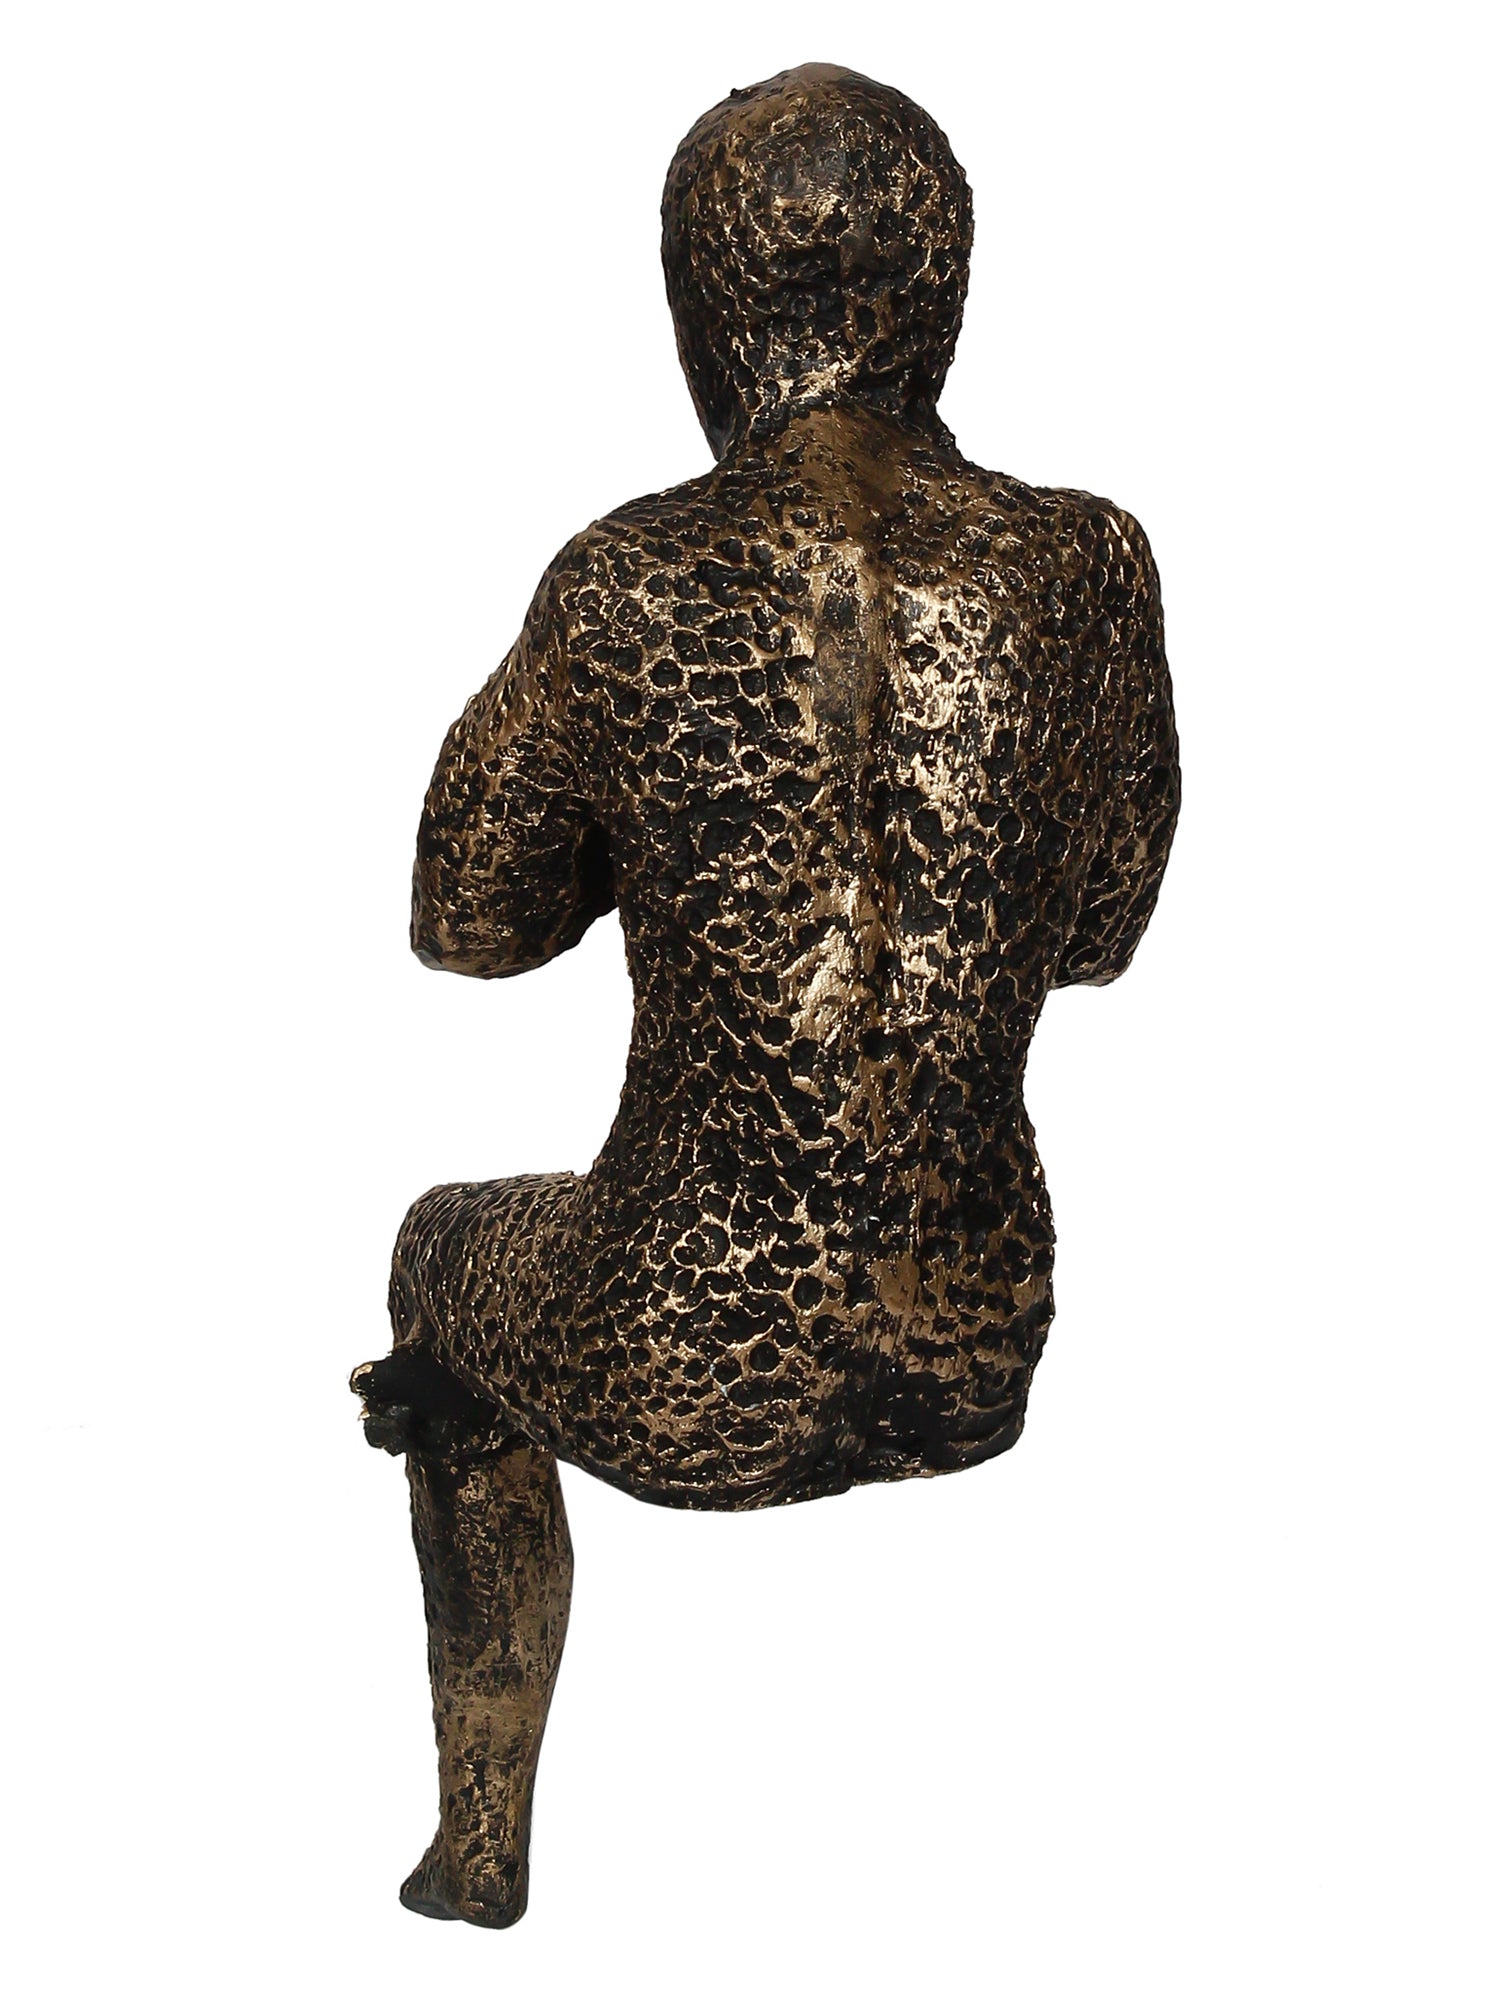 Brown Polyresin Man Sitting In Thinking Position Decorative Figurine 5